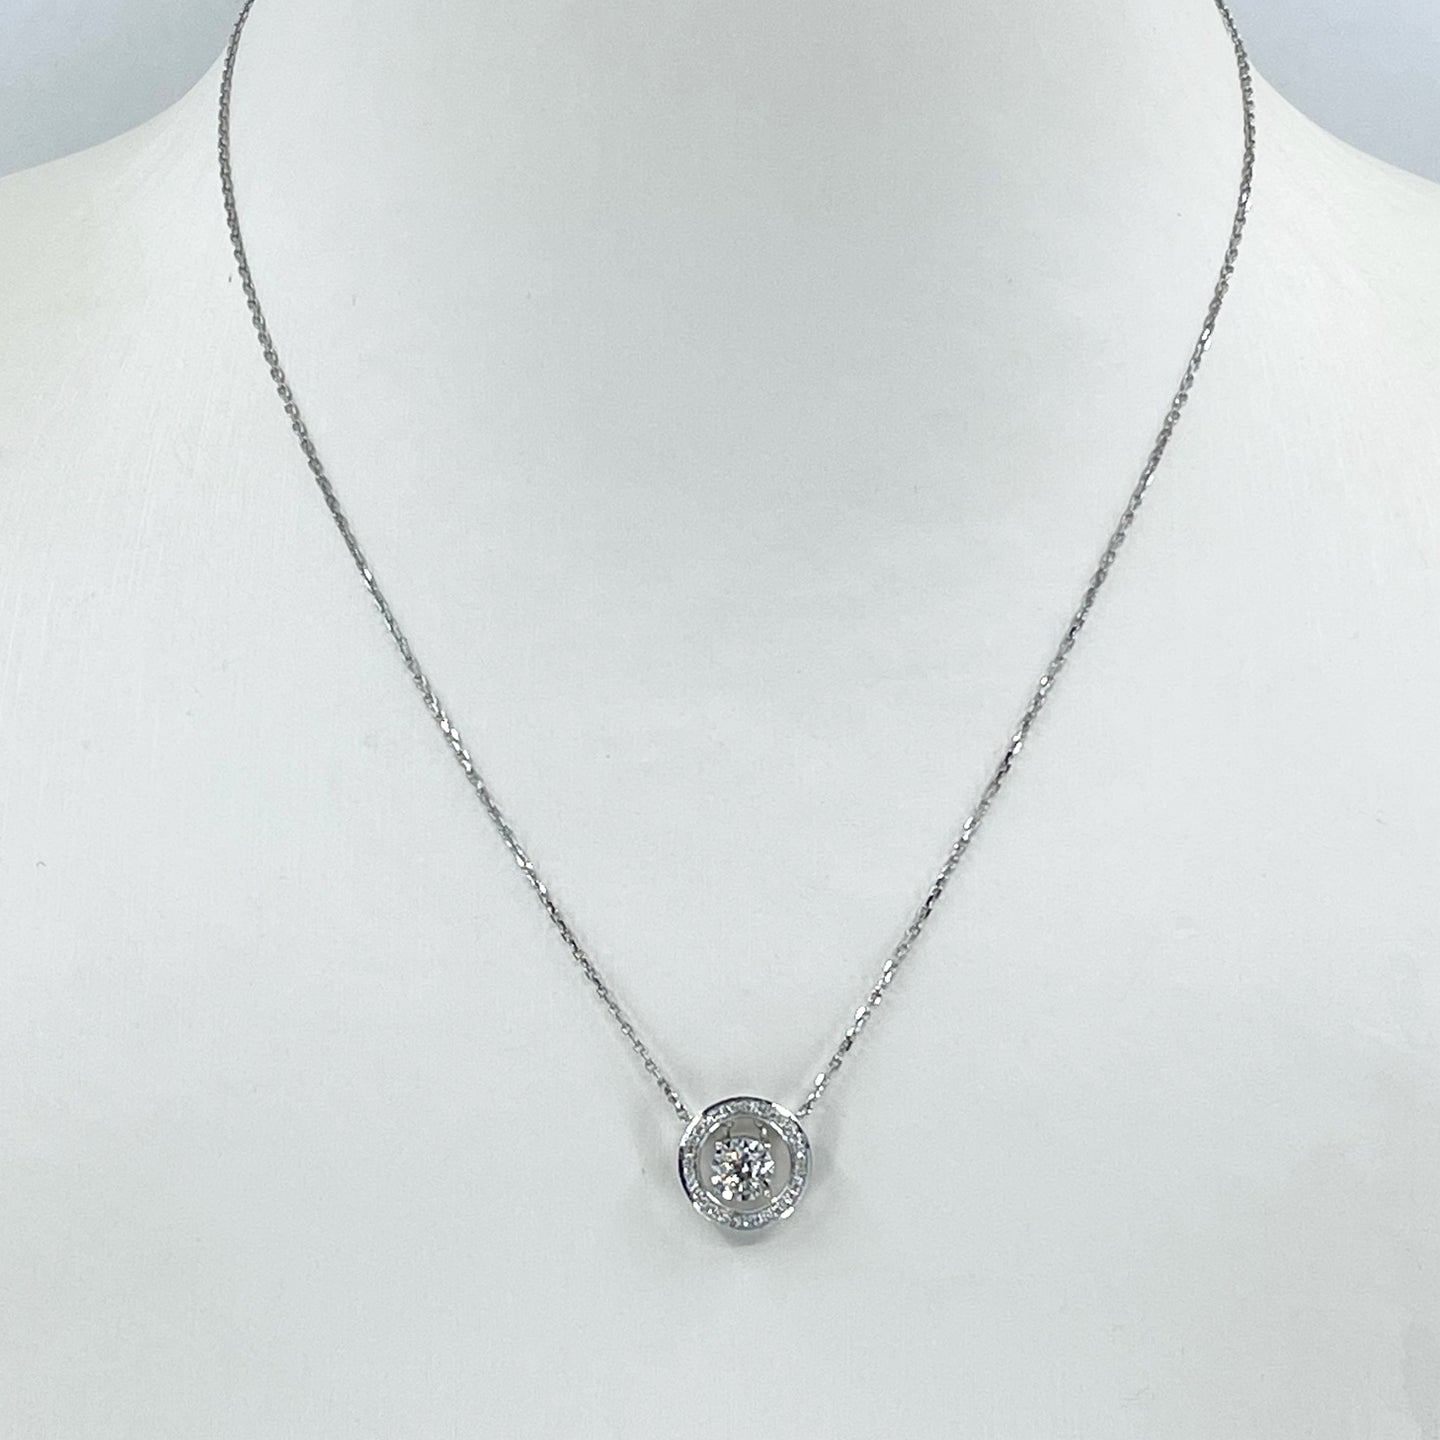 18K Solid White Gold Link Chain Necklace with Diamond Pendant 15